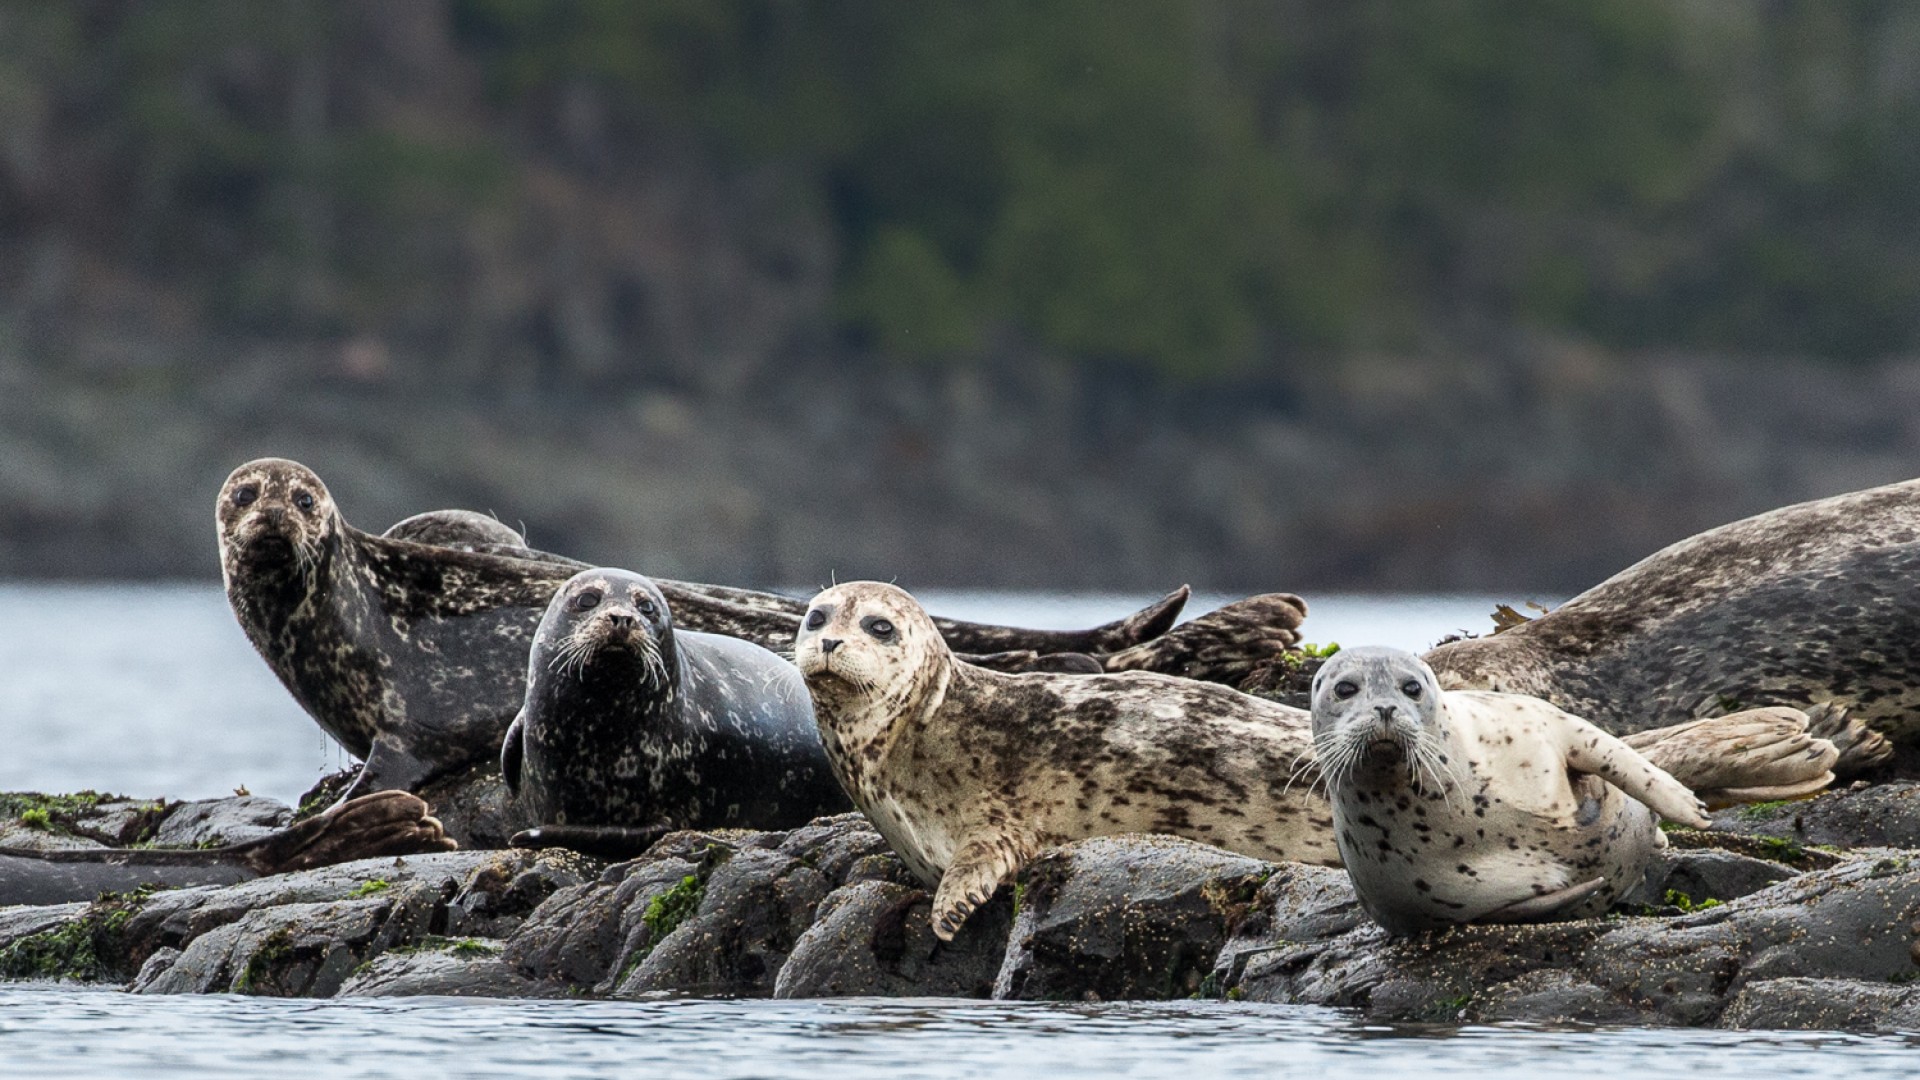 A group of seals all looking the same direction perched on a rock in the middle of the water